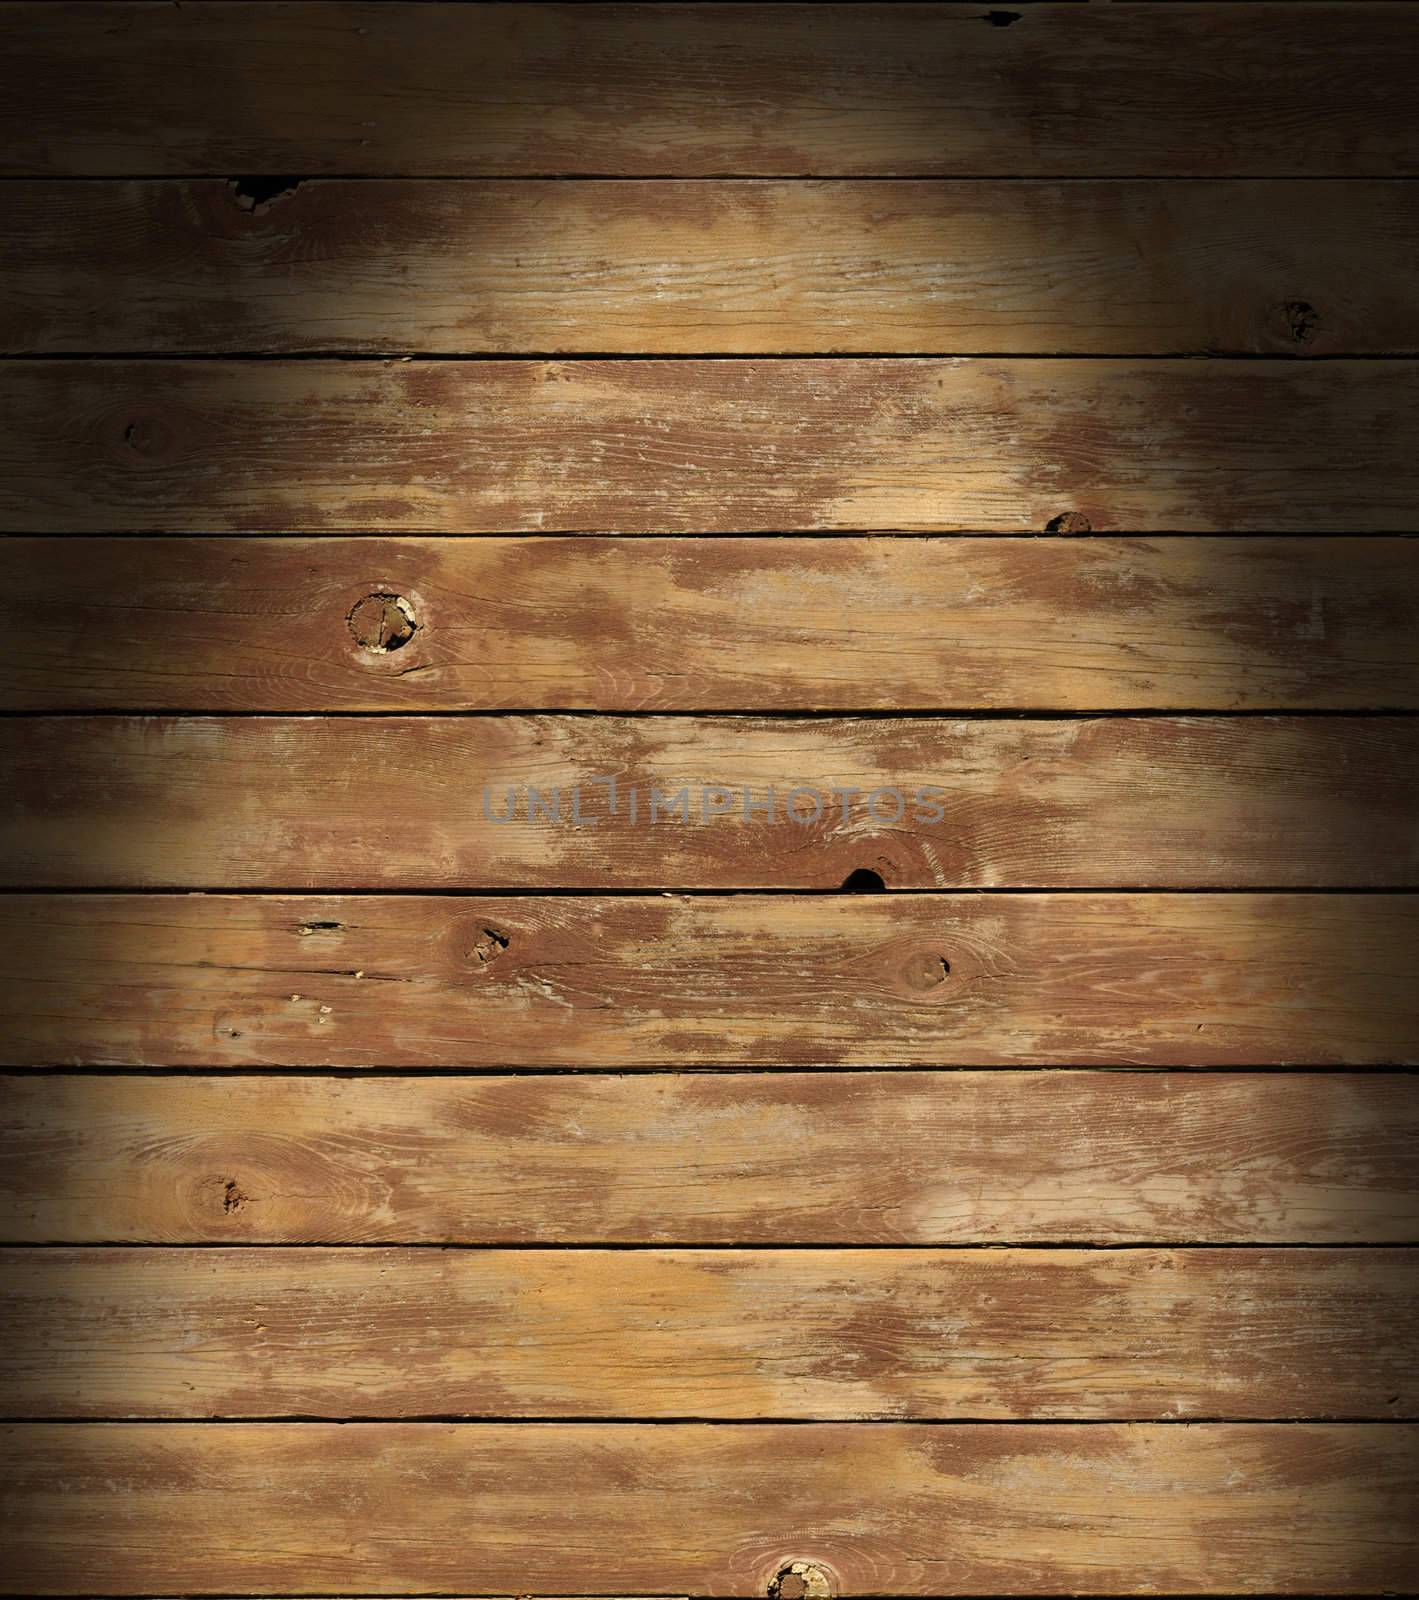 Distressed wooden surface lit dramatically from above with boards running horizontally.